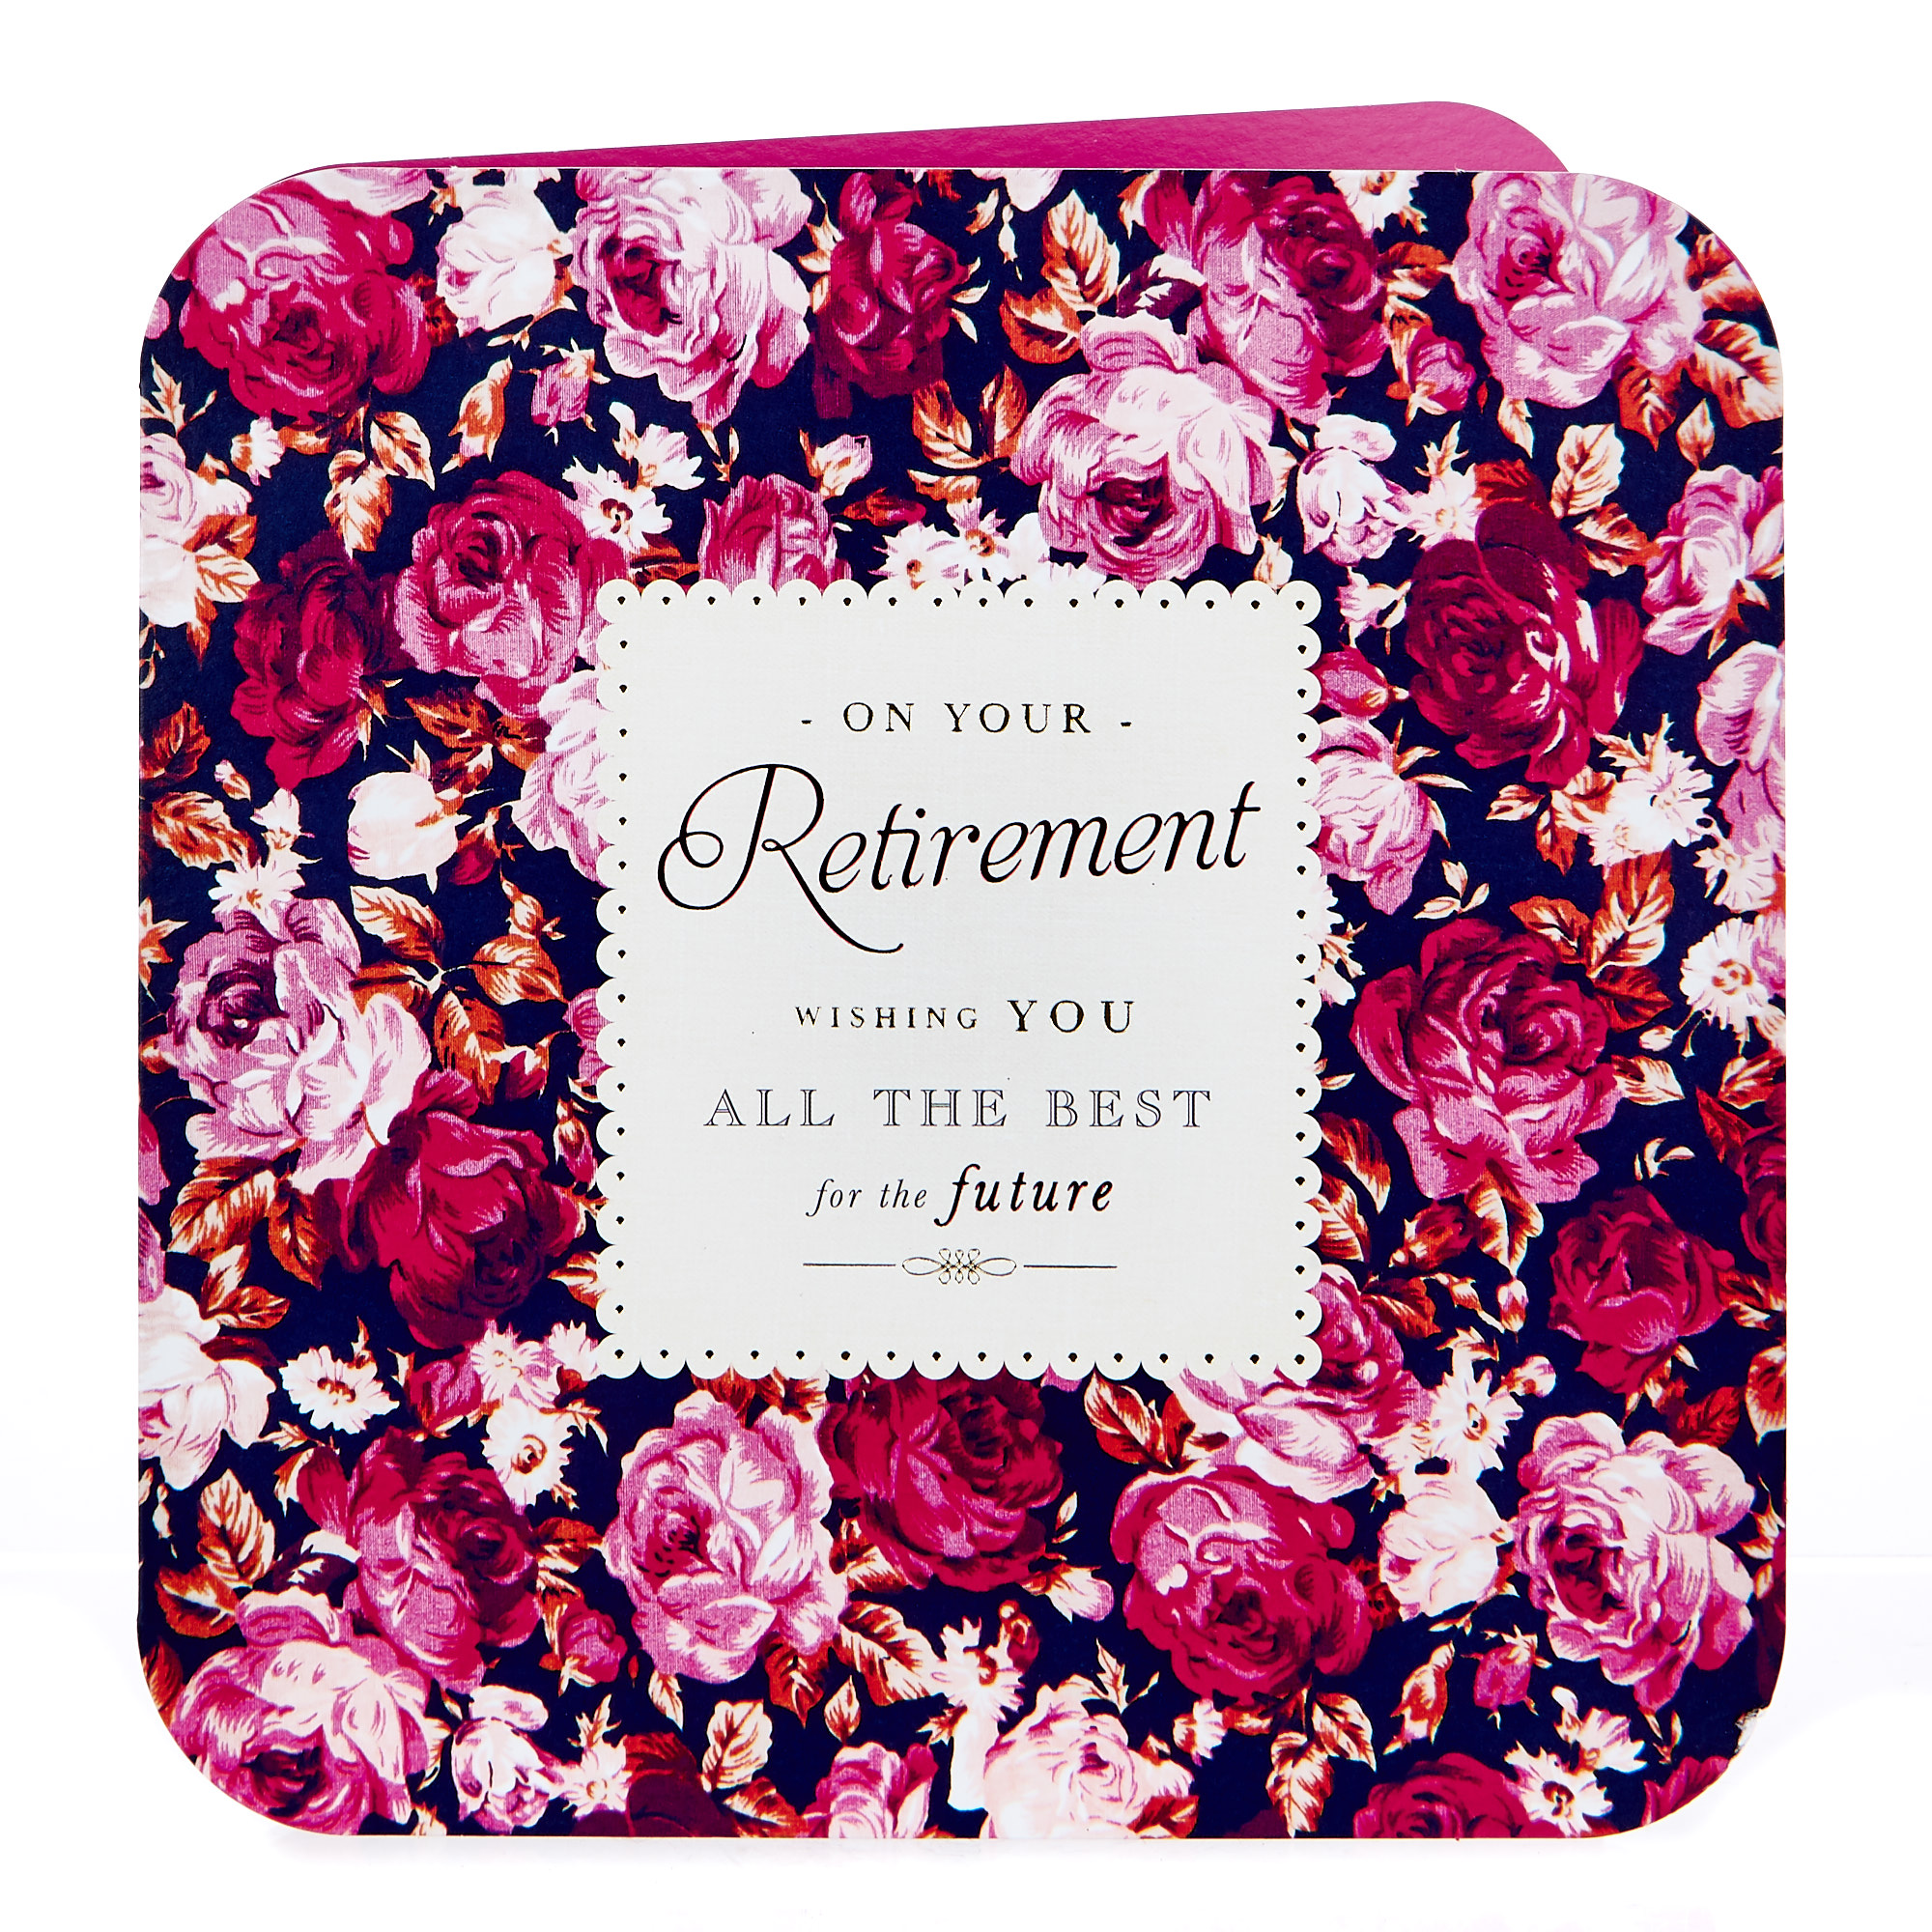 Platinum Collection Retirement Card - All The Best, Floral